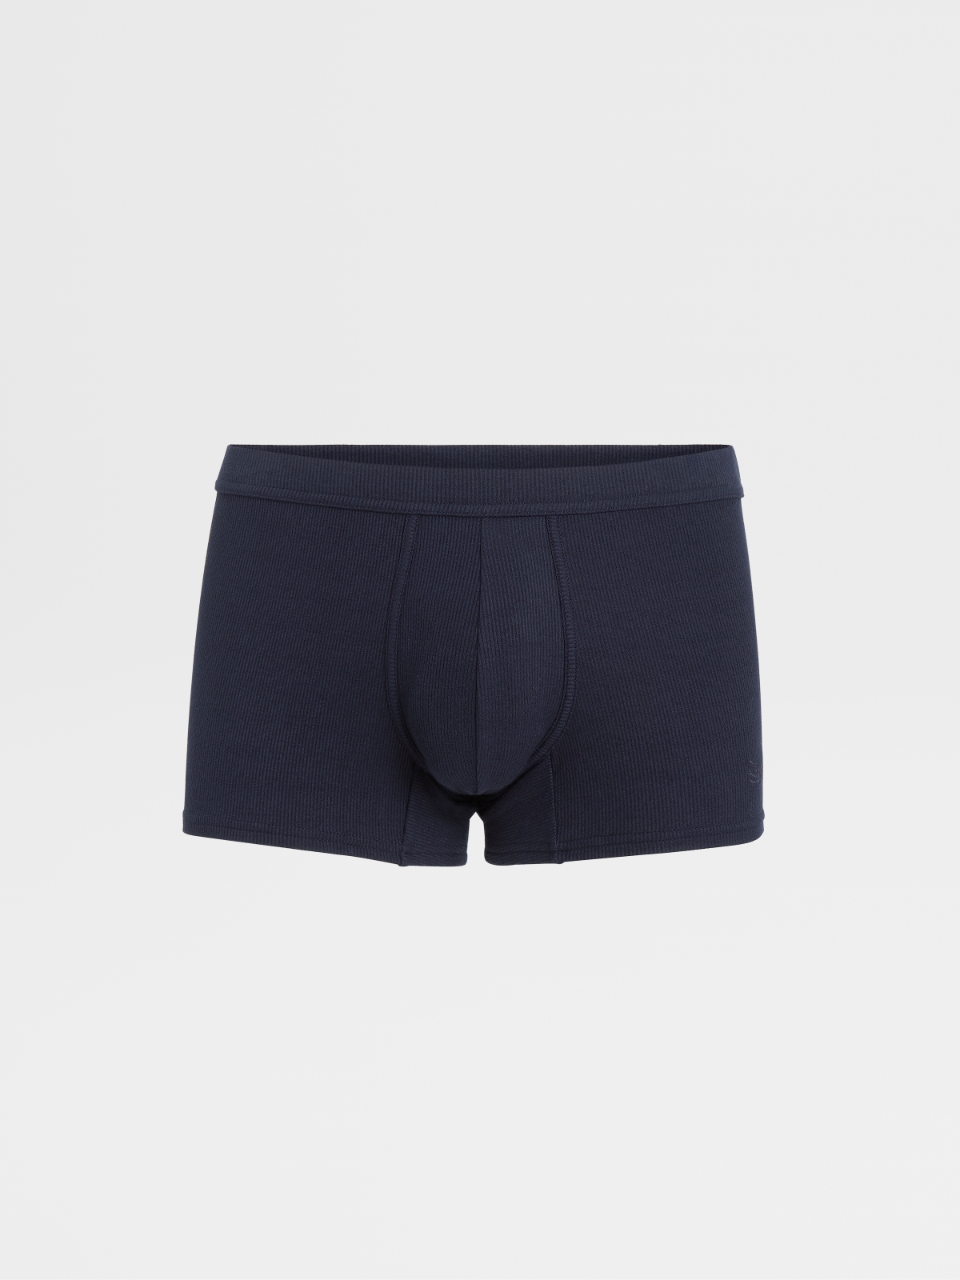 Navy Blue Ribbed Stretch Modal and Cashmere Trunks